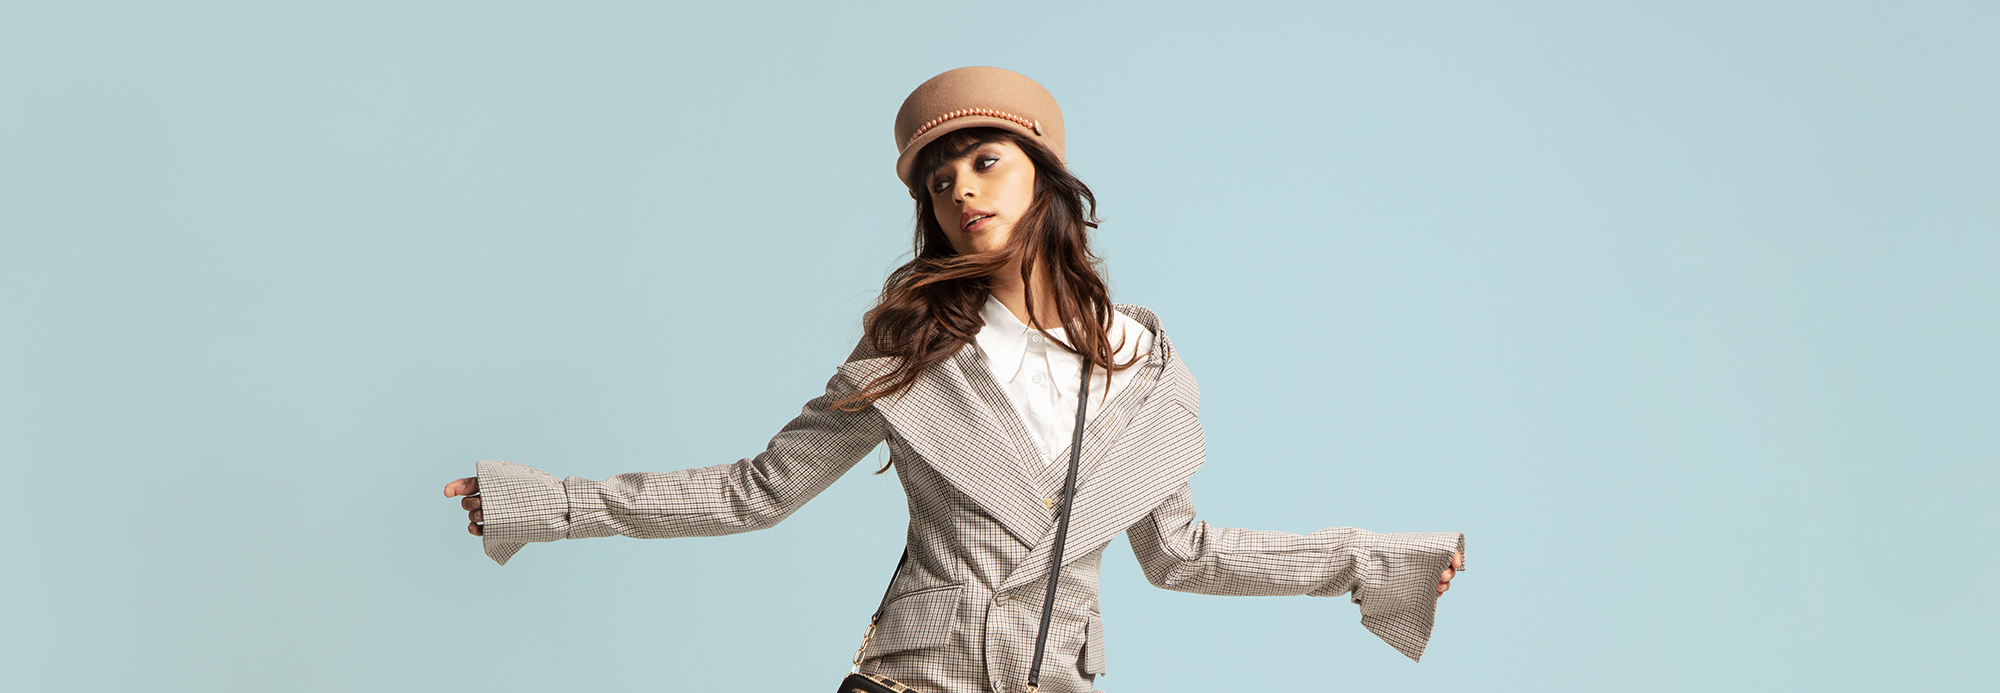 A young woman in a trendy oversize blazer and conductor's hat striking a pose